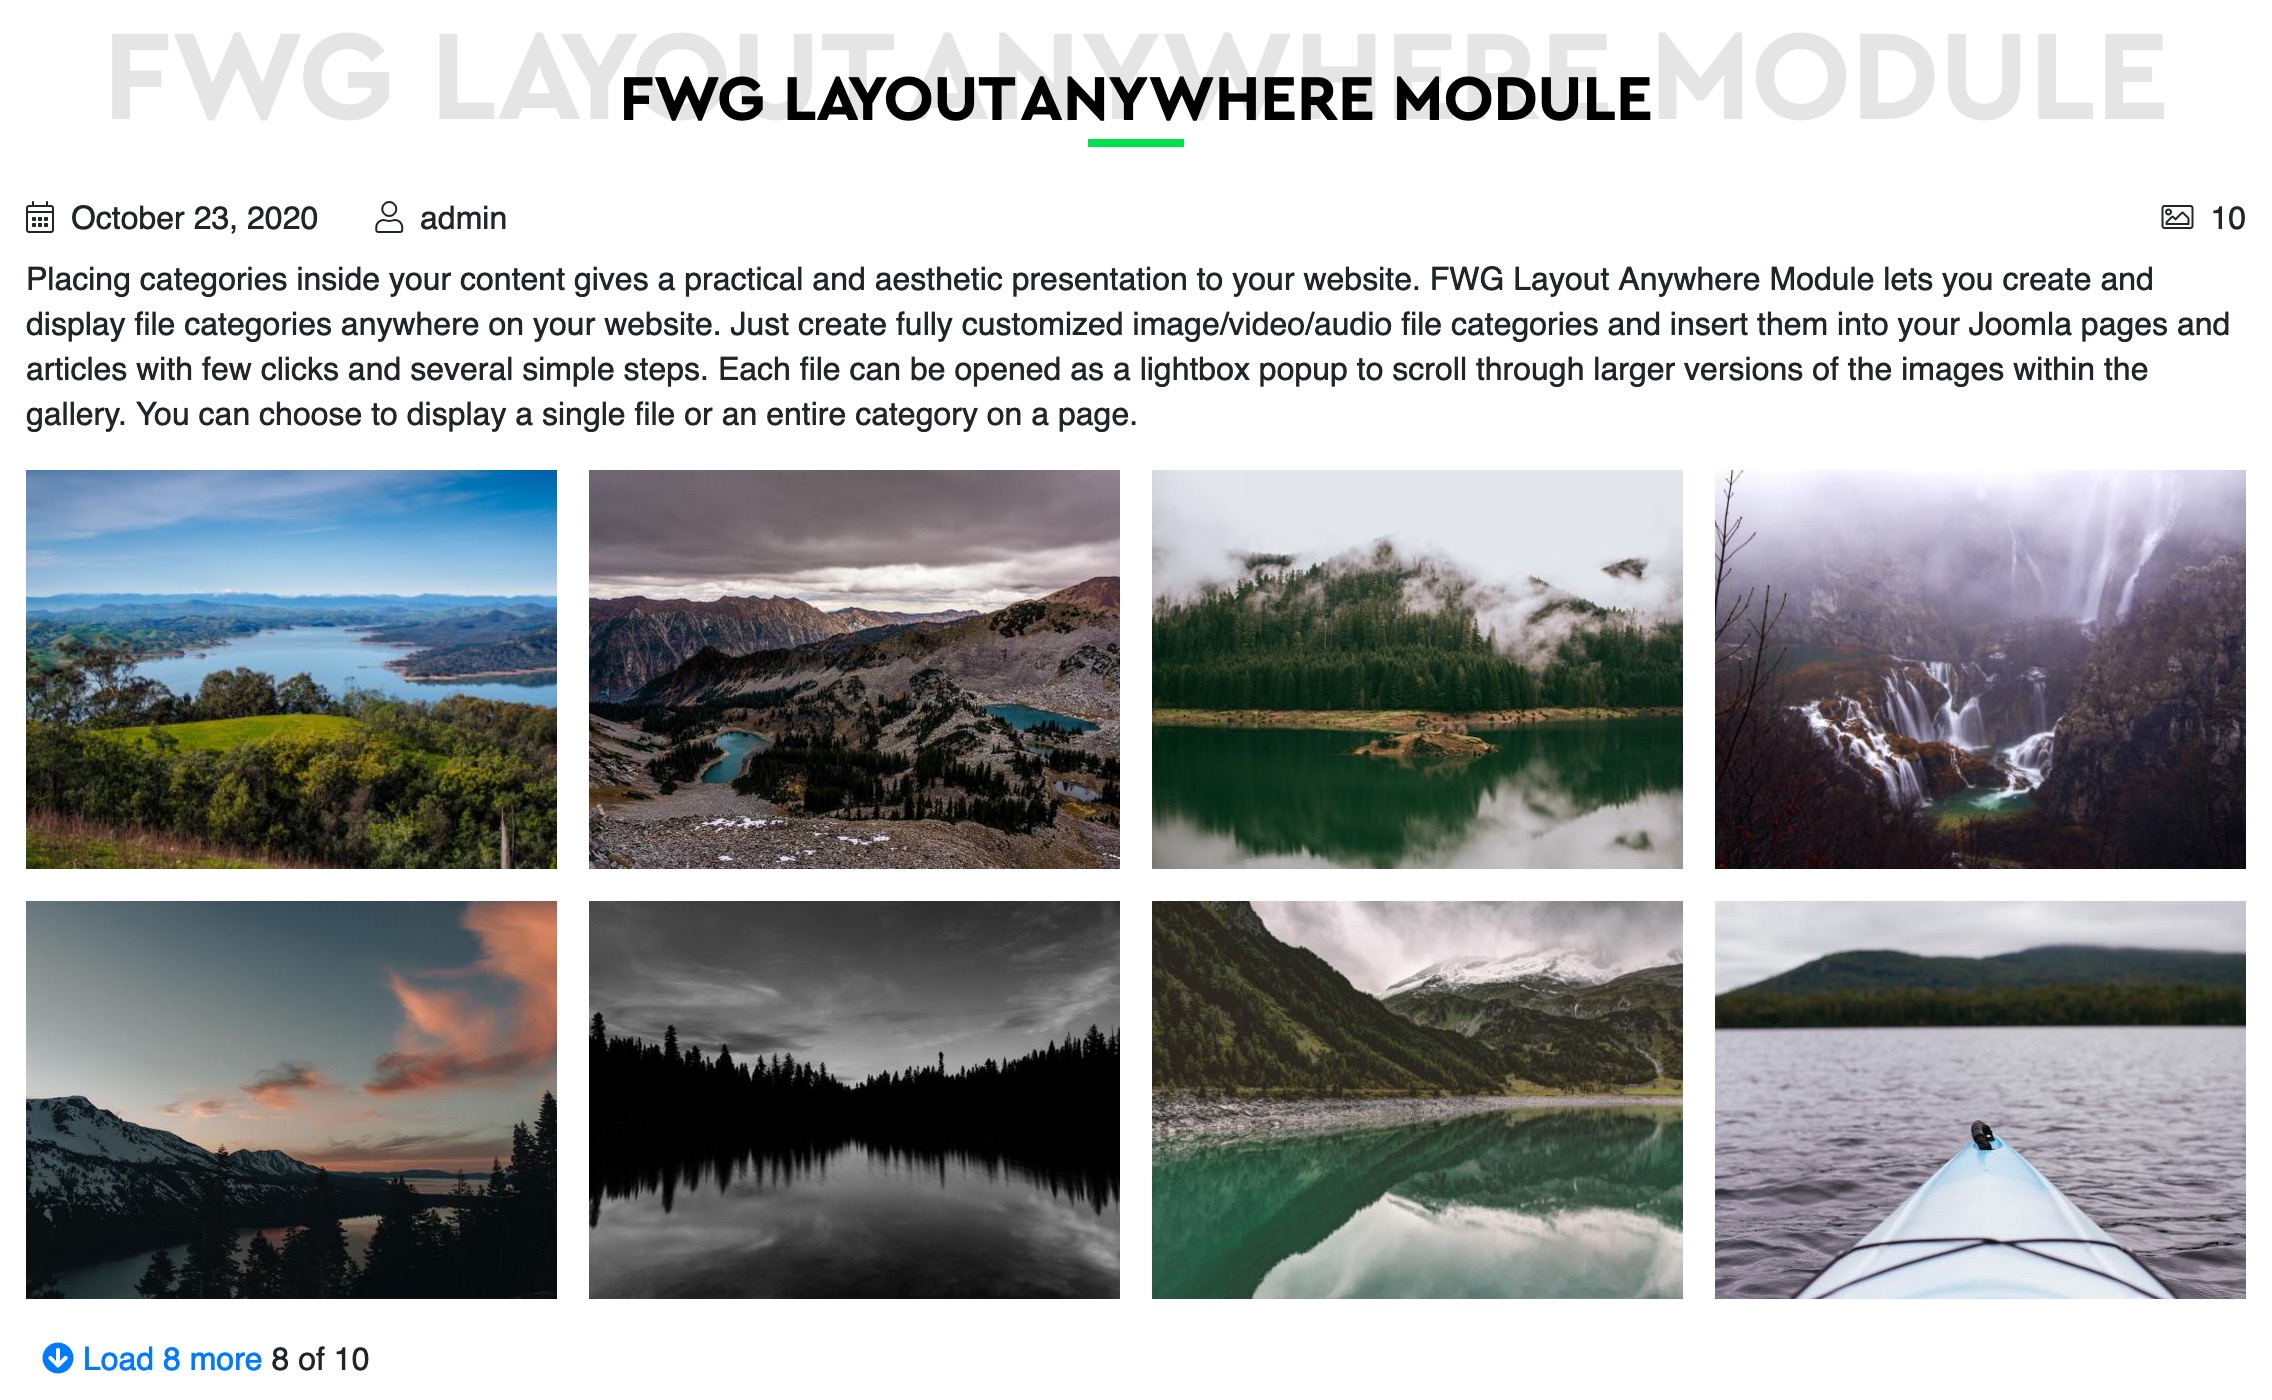 <p>Place a category or a single file view in a module position or content with all individual category settings.</p><ul><li>4 grids</li><li>Different designs</li><li>Show/hide items for gallery/file info</li><li>Use loadmodule plugin to insert a gallery into an article.</li></ul>